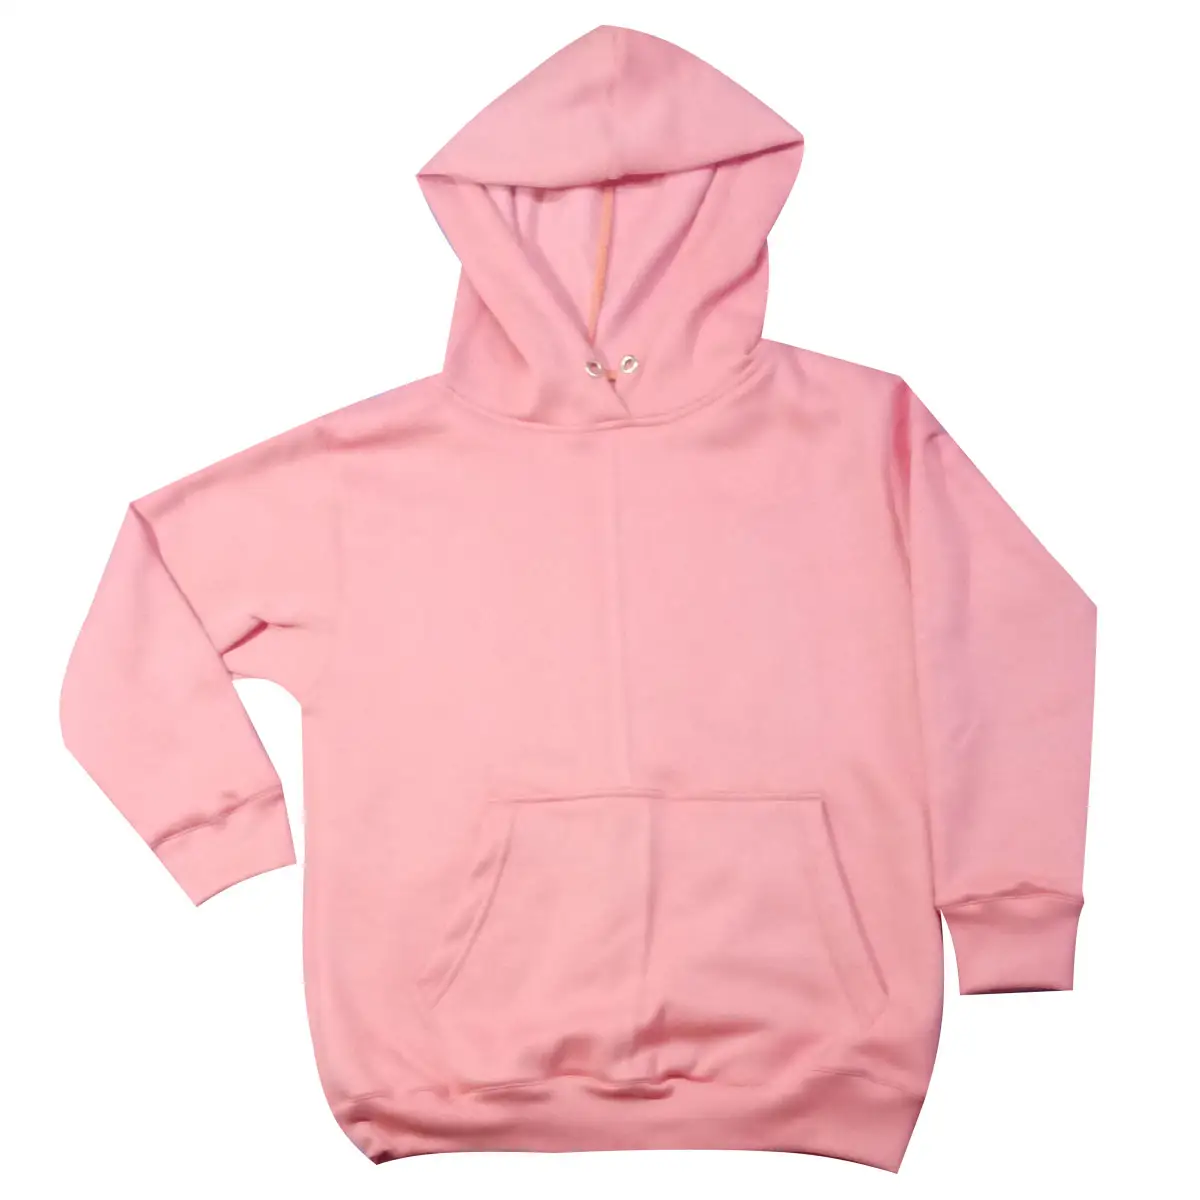 Hot Sell OEM Manufacturer Design Reversible Hoodies Cotton 350g Fleece Hoodie Design Multi Color All Sizes